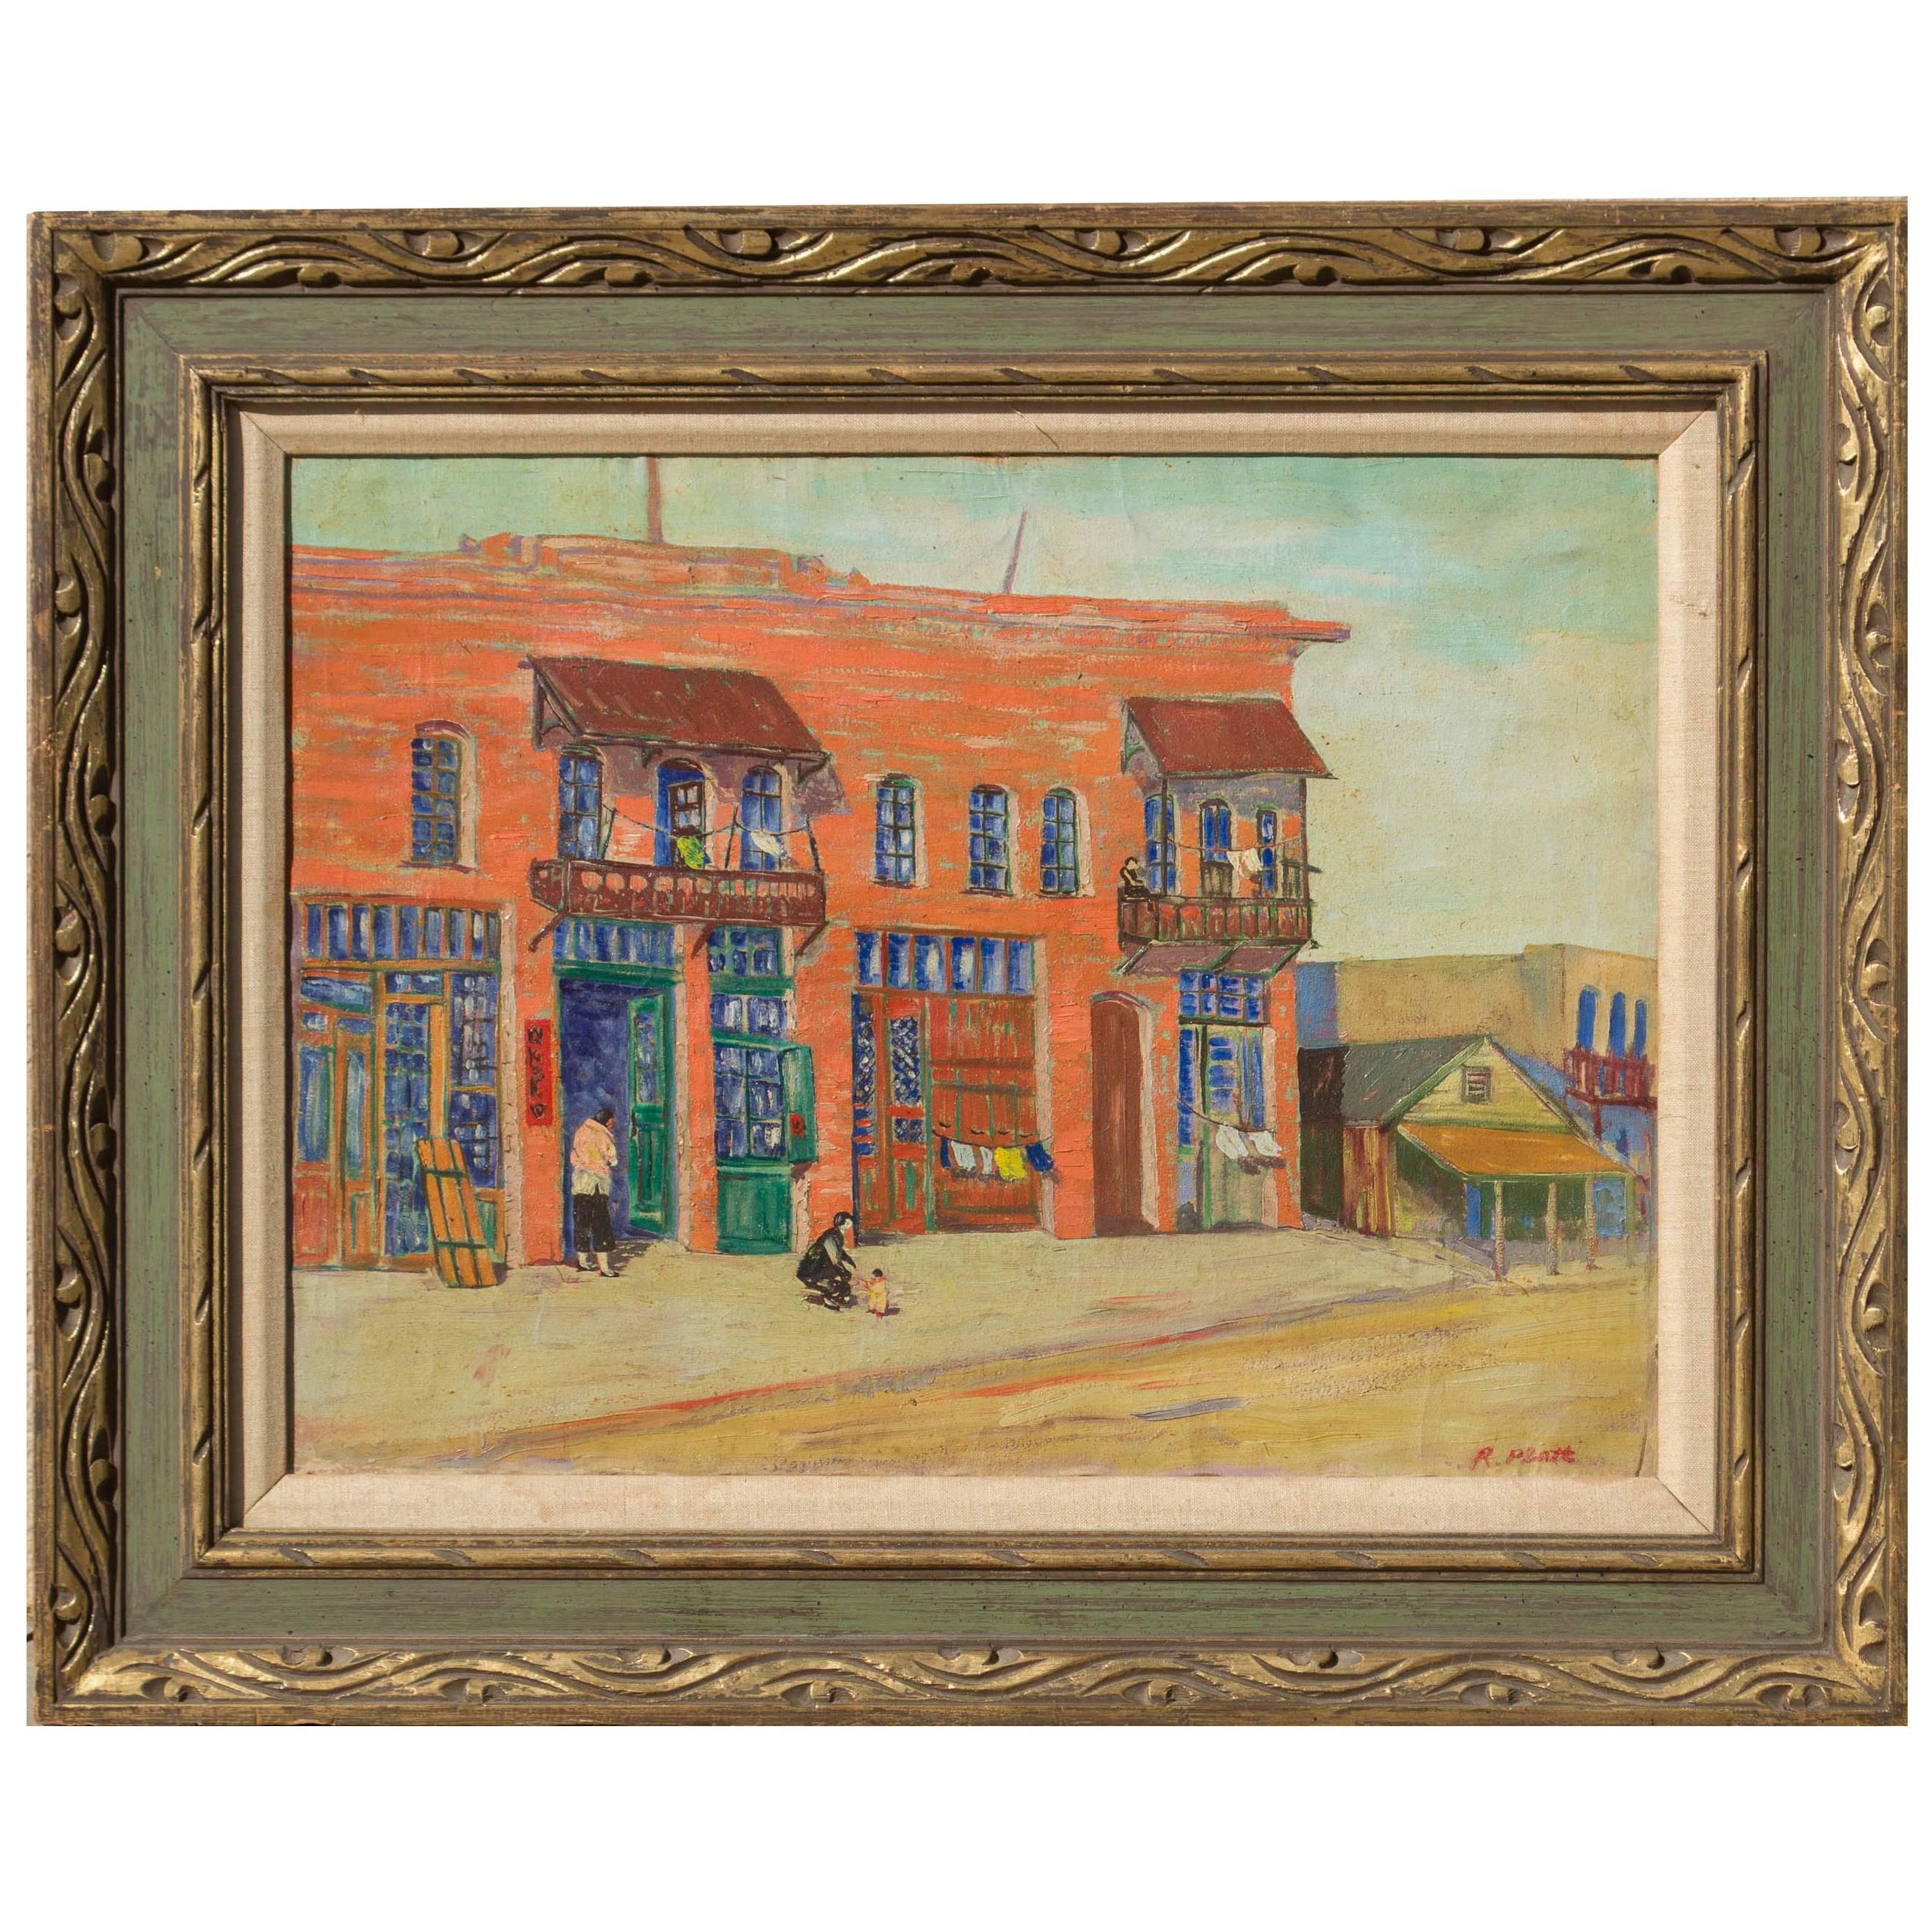 20h Century Los Angeles Oil on Canvas Painting by R. Platt, circa 1930s For Sale